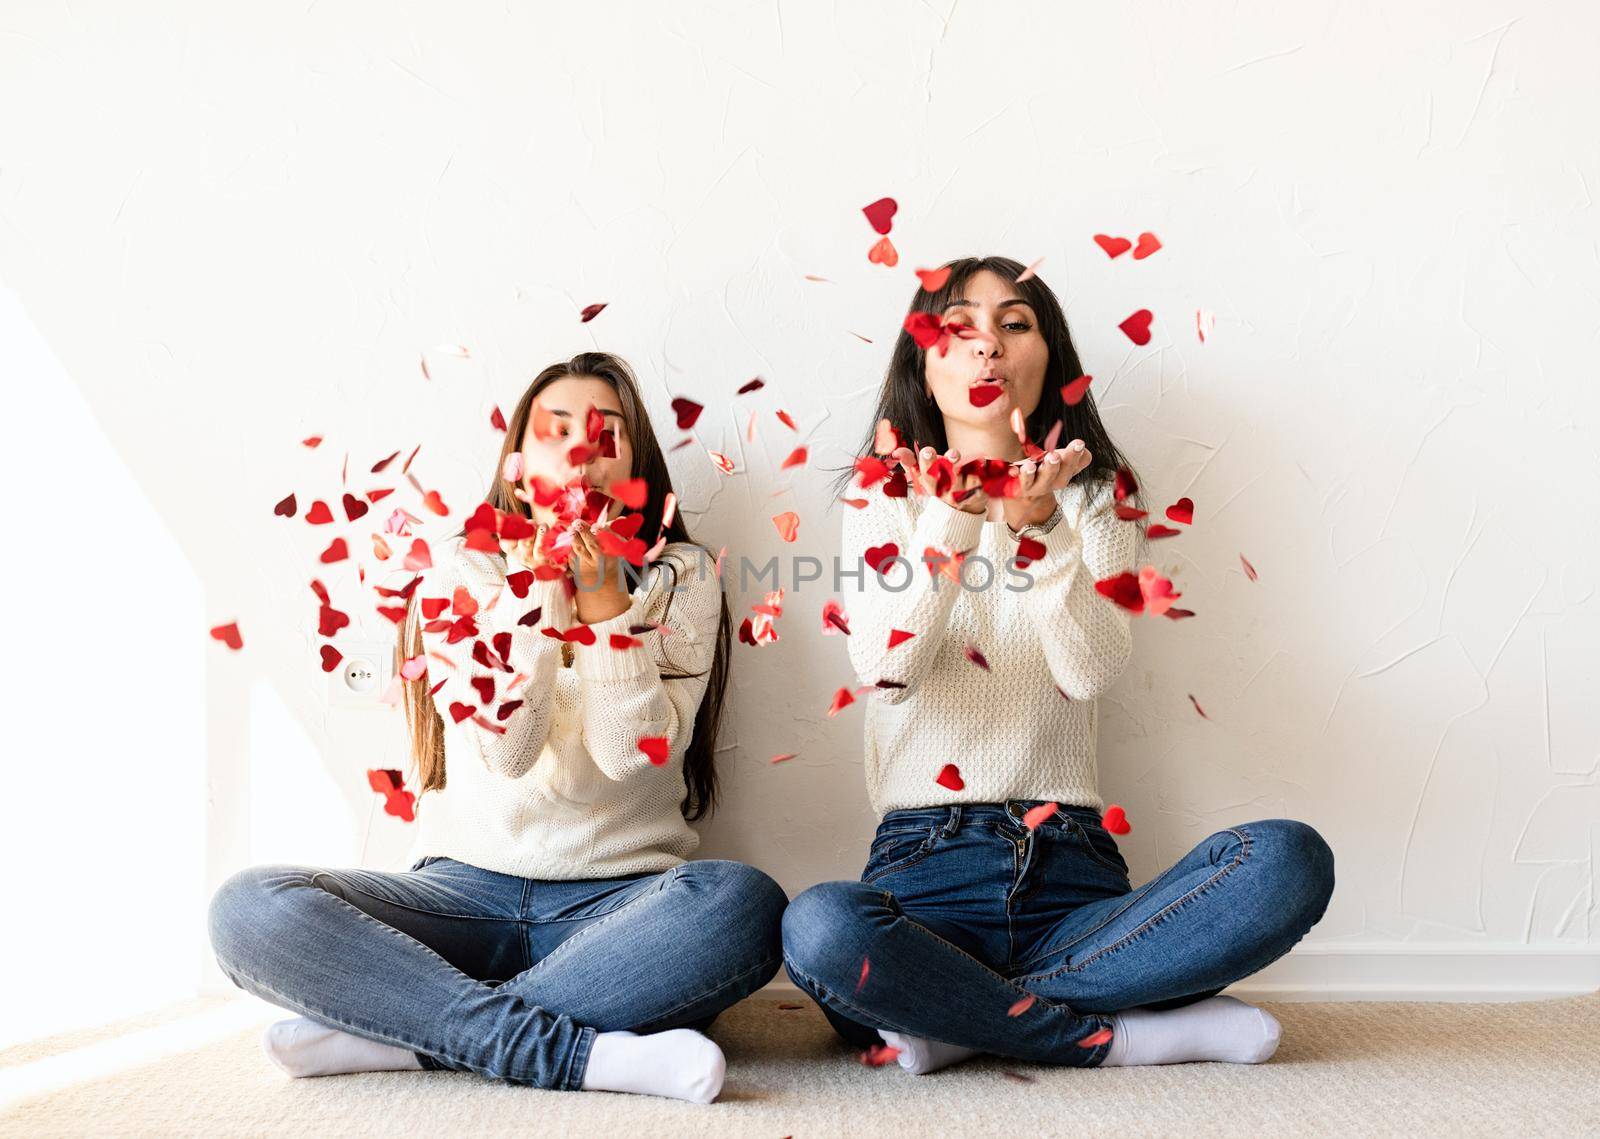 Two best friends having fun at home blowing red heart shape confetti